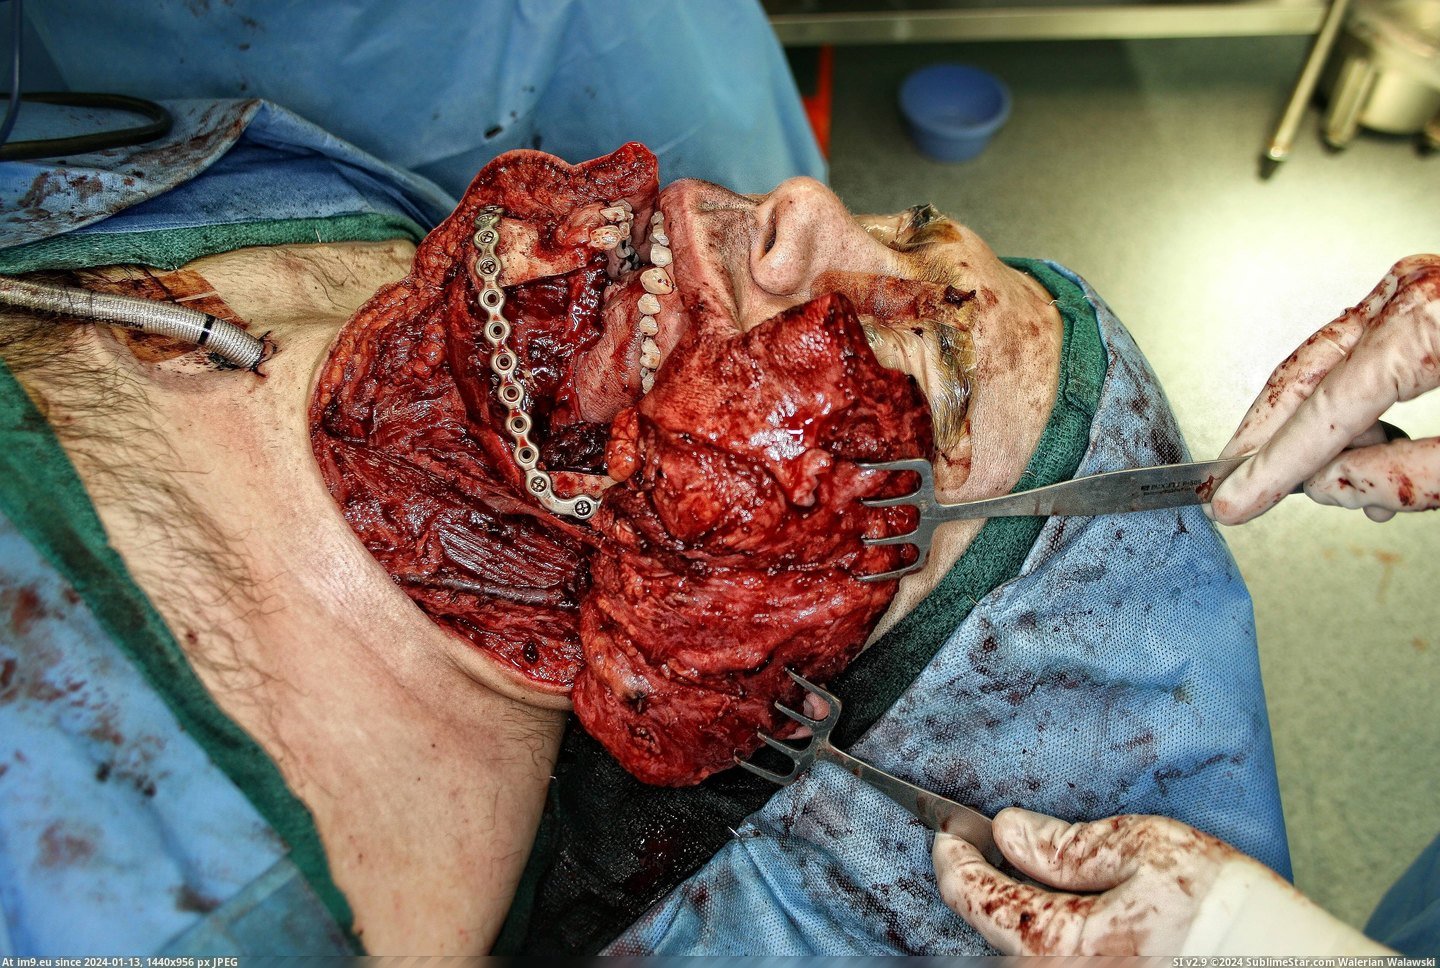 #Wtf #Surgery #Cancer #Oral [Wtf] Oral Cancer Surgery 6 Pic. (Image of album My r/WTF favs))